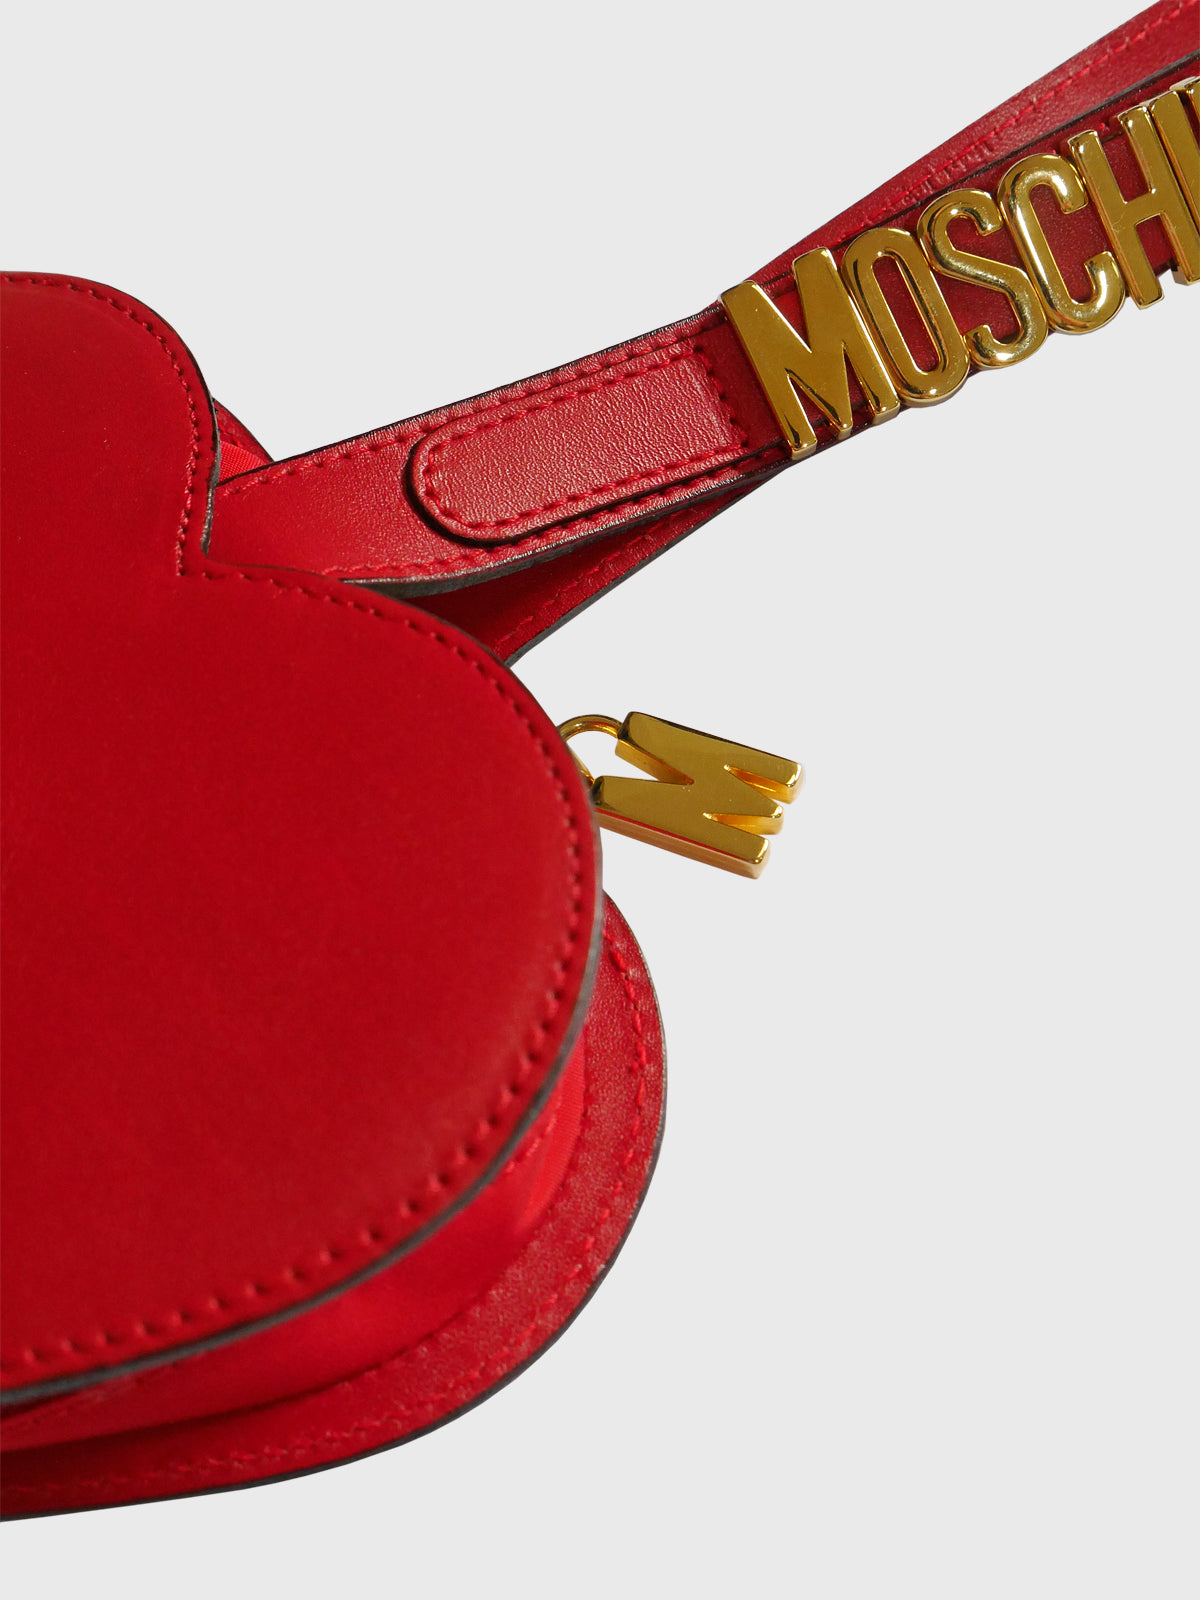 MOSCHINO Redwall Vintage Red Heart Wristlet Evening Bag